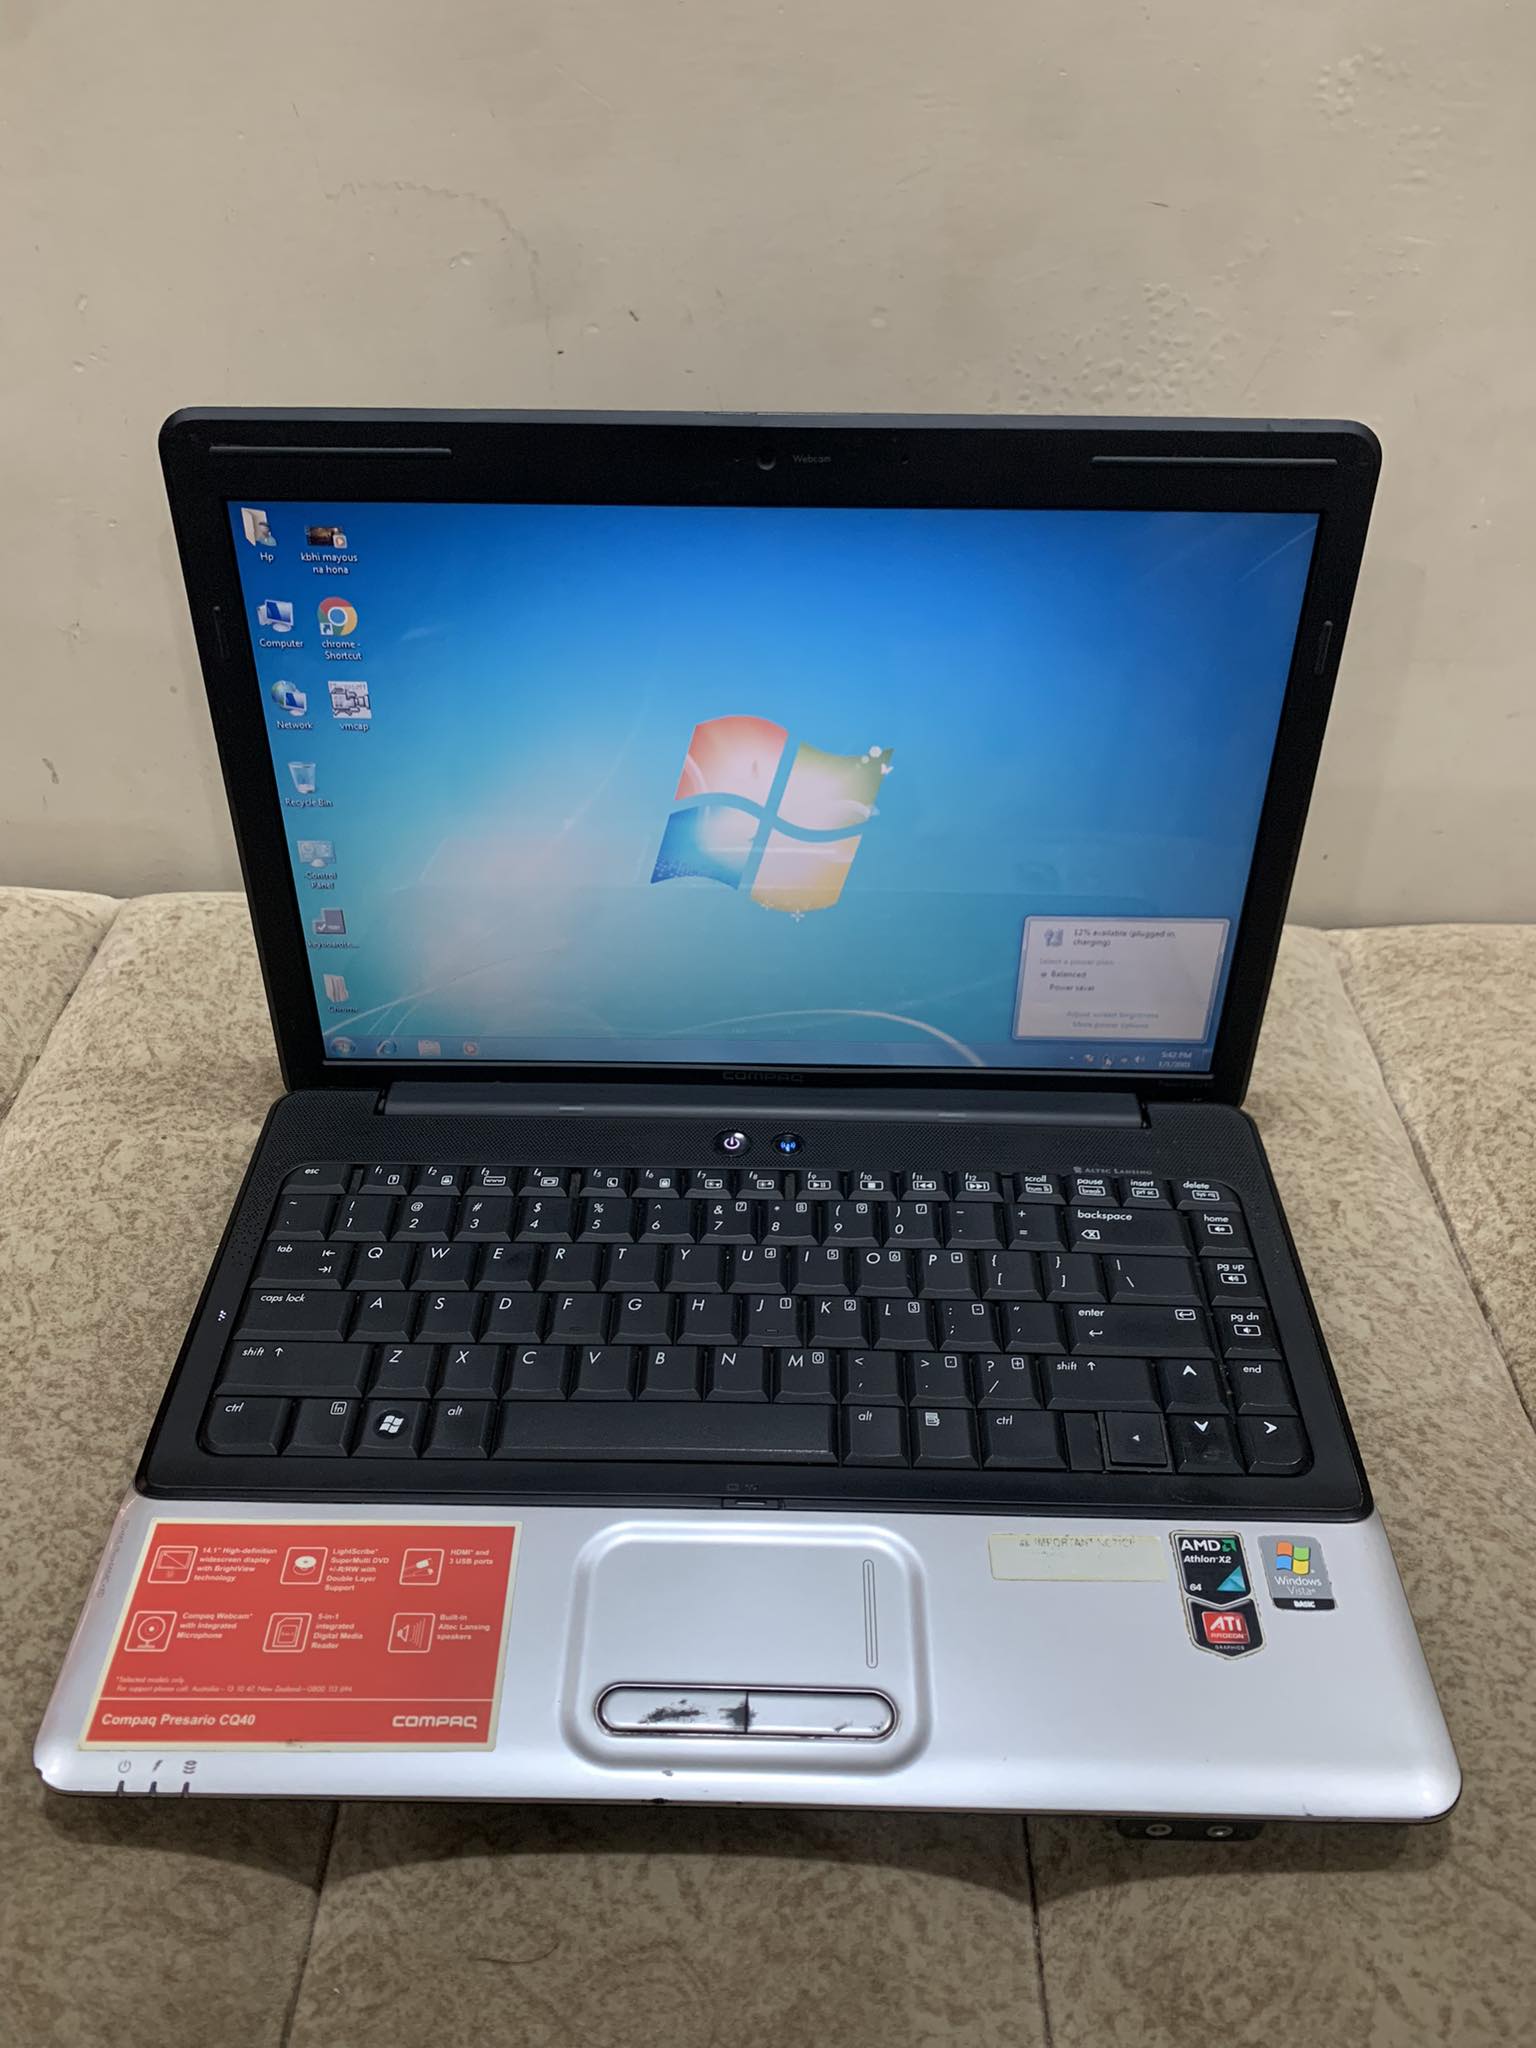 Hp Compaq Presario CQ40 Notebook PC Core 2 Duo Awesome laptop